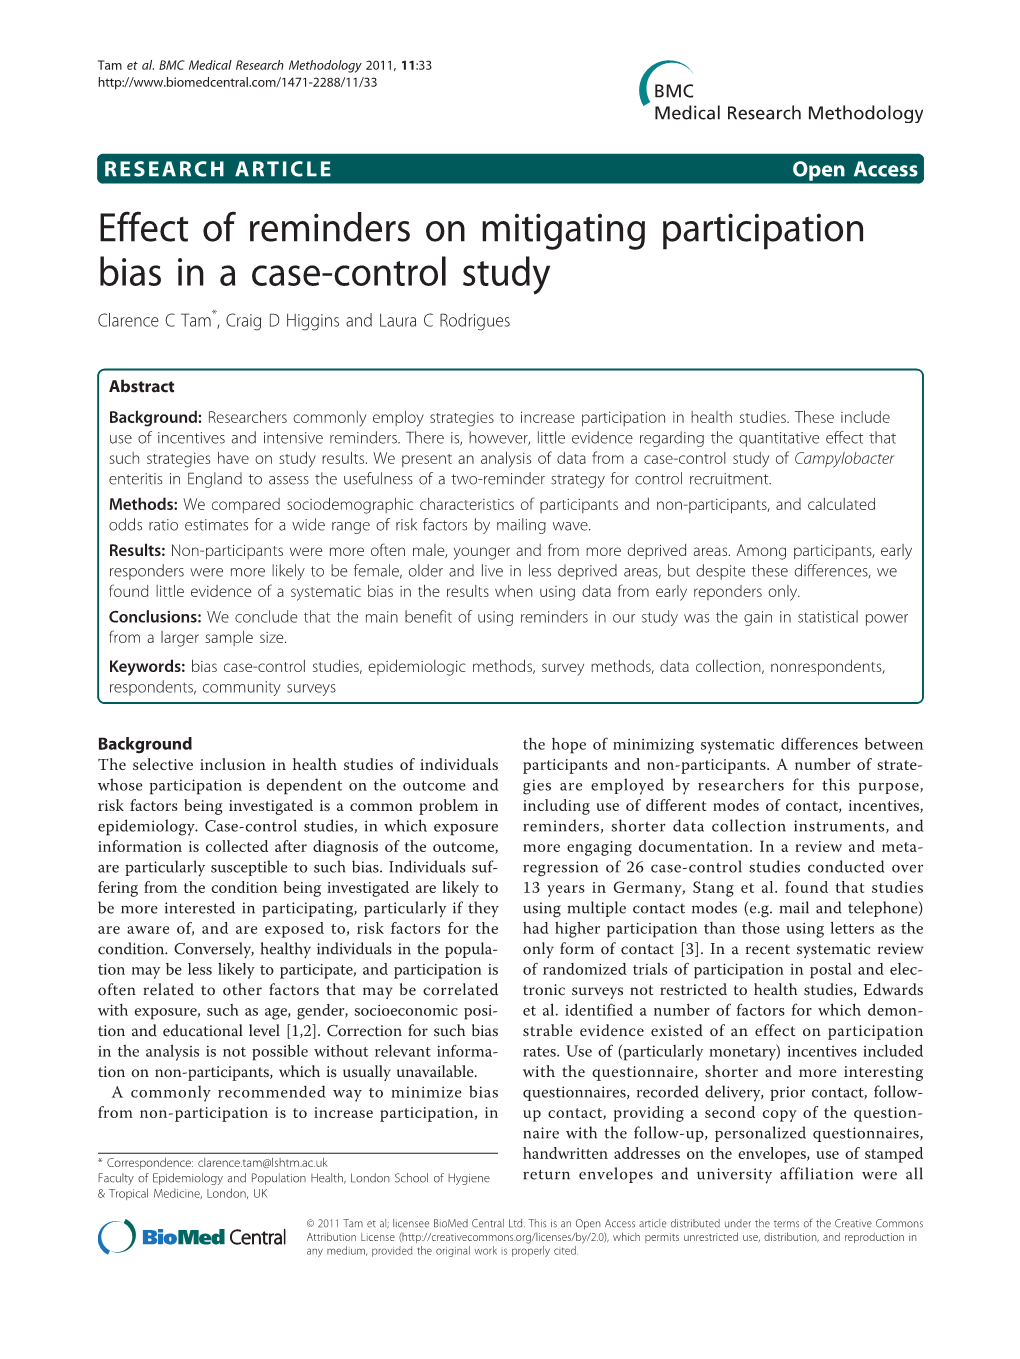 Effect of Reminders on Mitigating Participation Bias in a Case-Control Study Clarence C Tam*, Craig D Higgins and Laura C Rodrigues